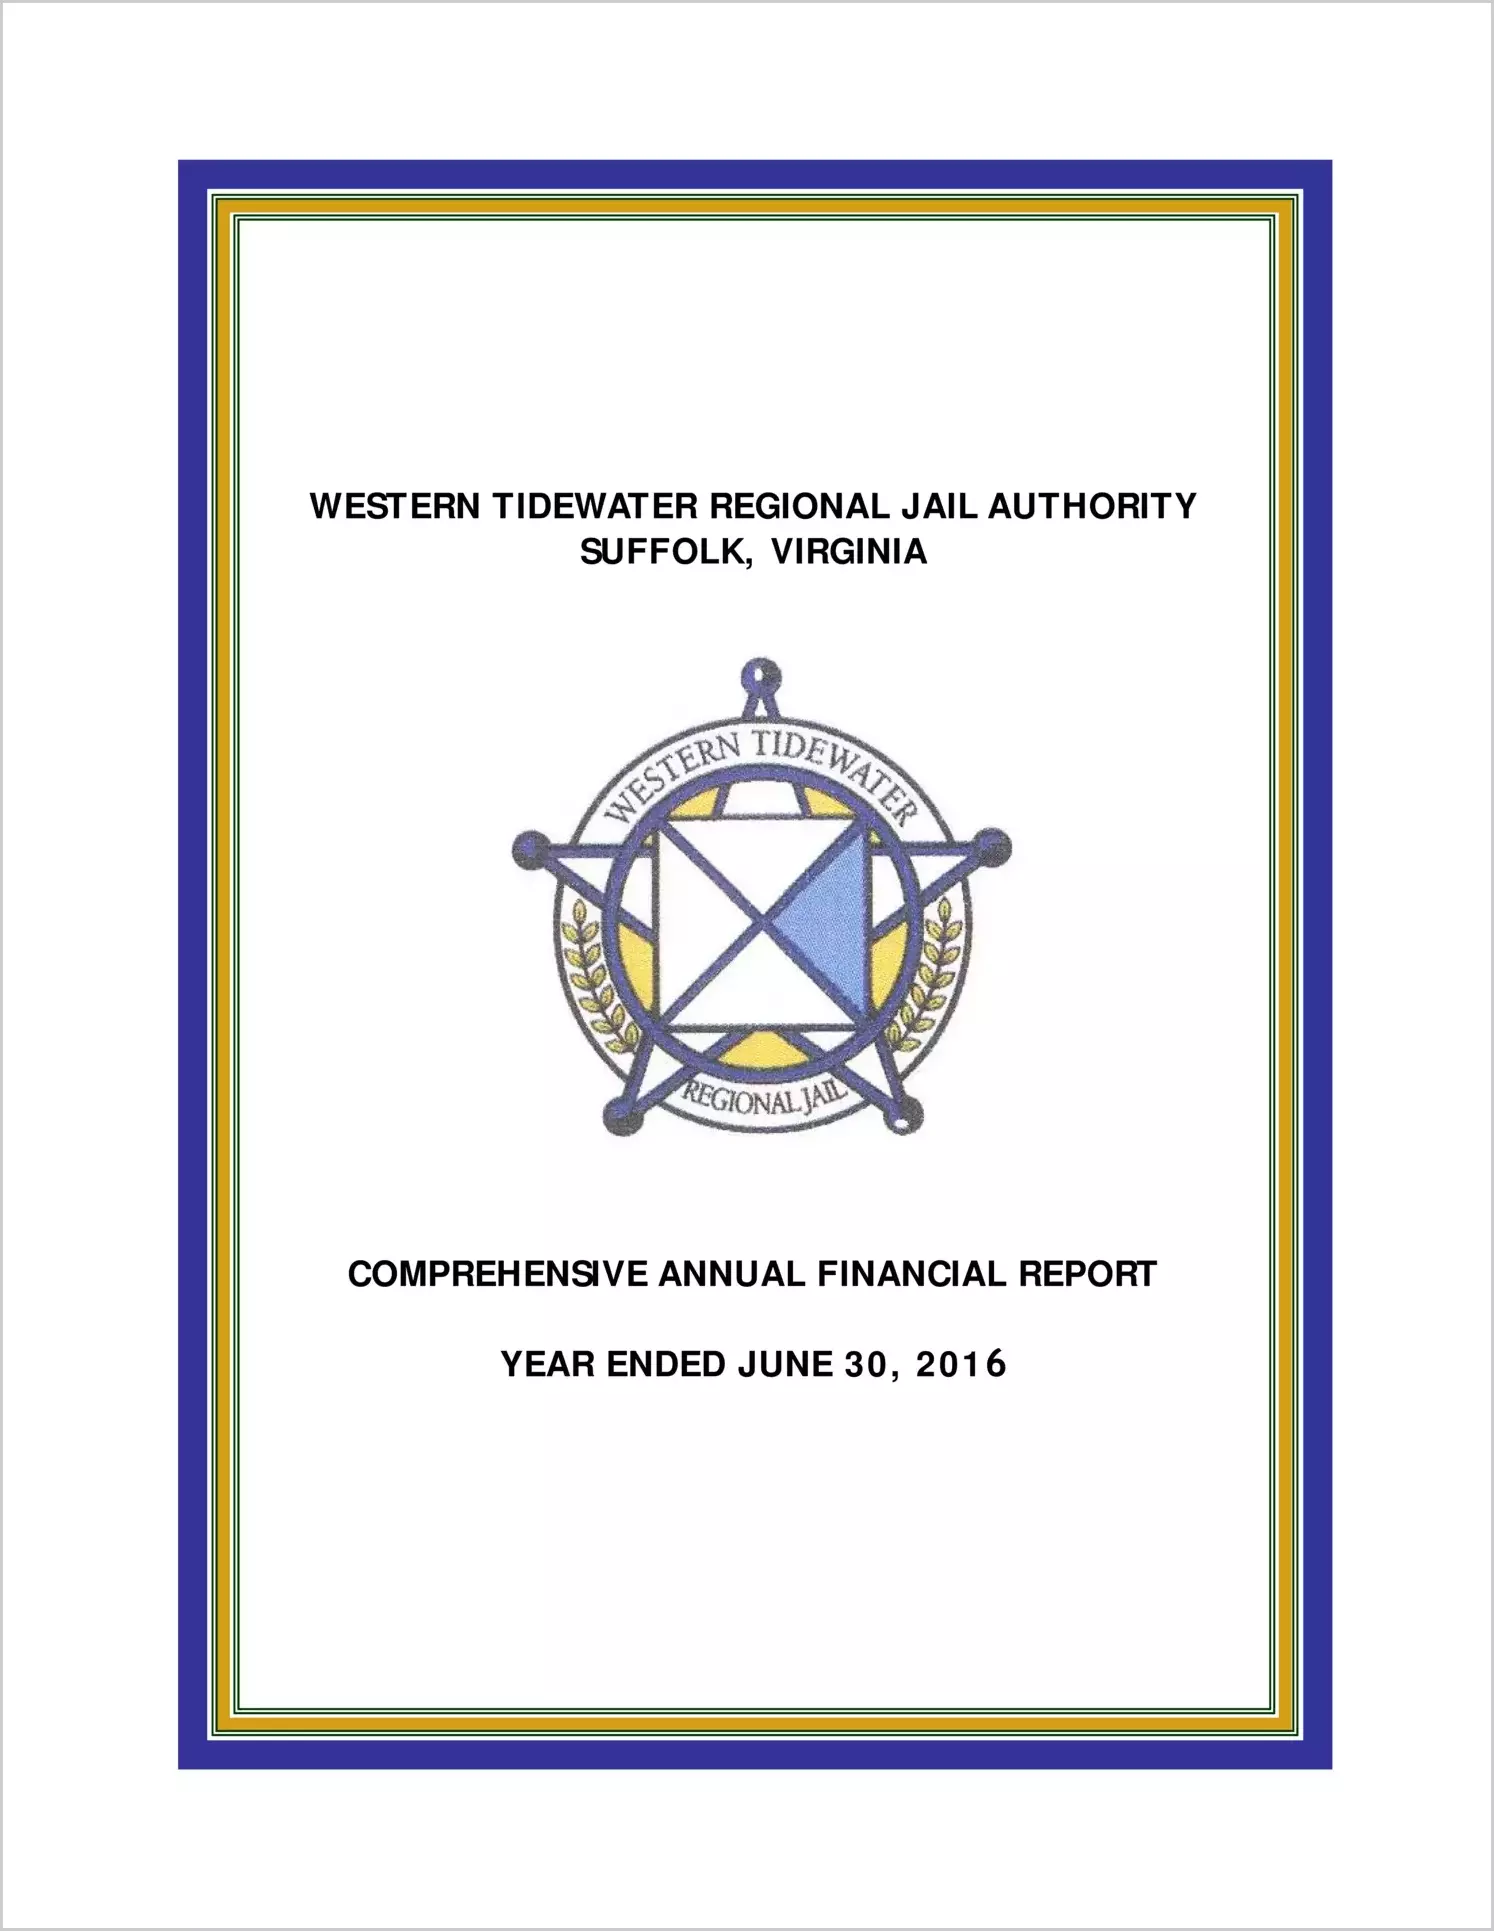 2016 ABC/Other Annual Financial Report  for Western Tidewater Regional Jail Authority